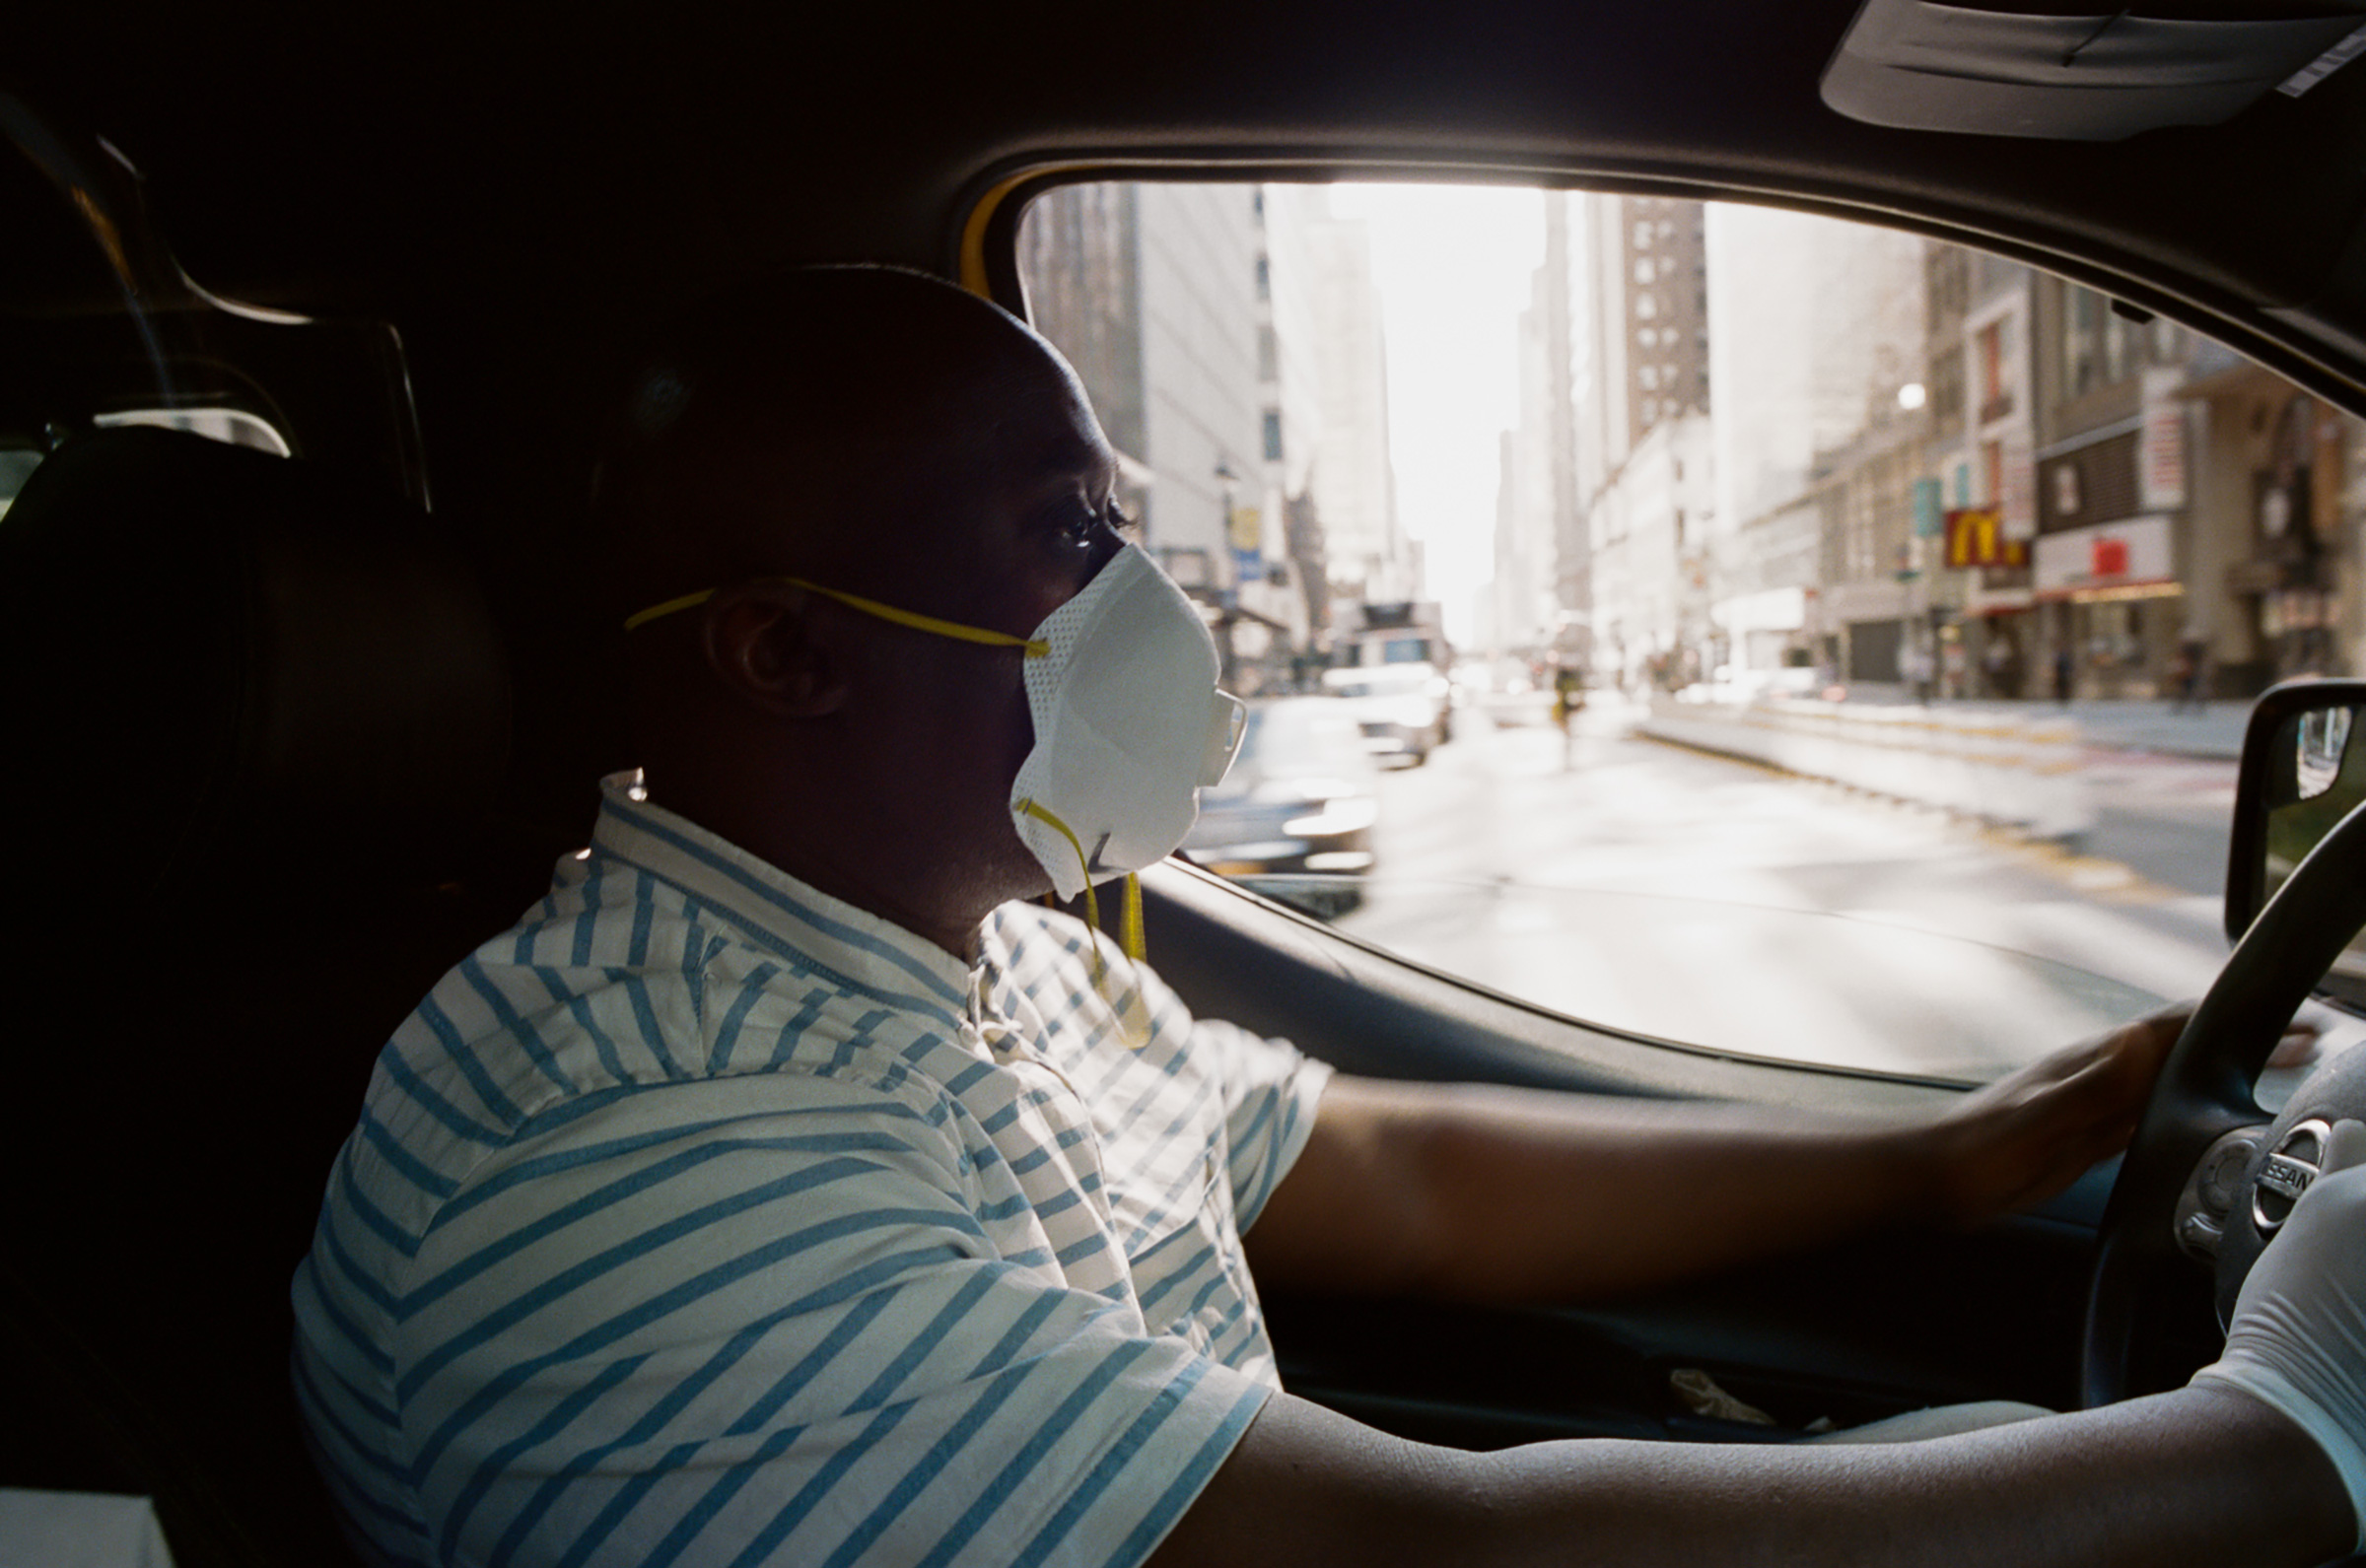 Jacob Smith, 49, taxi driver for almost two years in New York City. "It;s dangerous," he says. "My brother is upset, that I even go out and try to work. But I’m going and this is one of the things that’s difficult. You have to make ends meet."